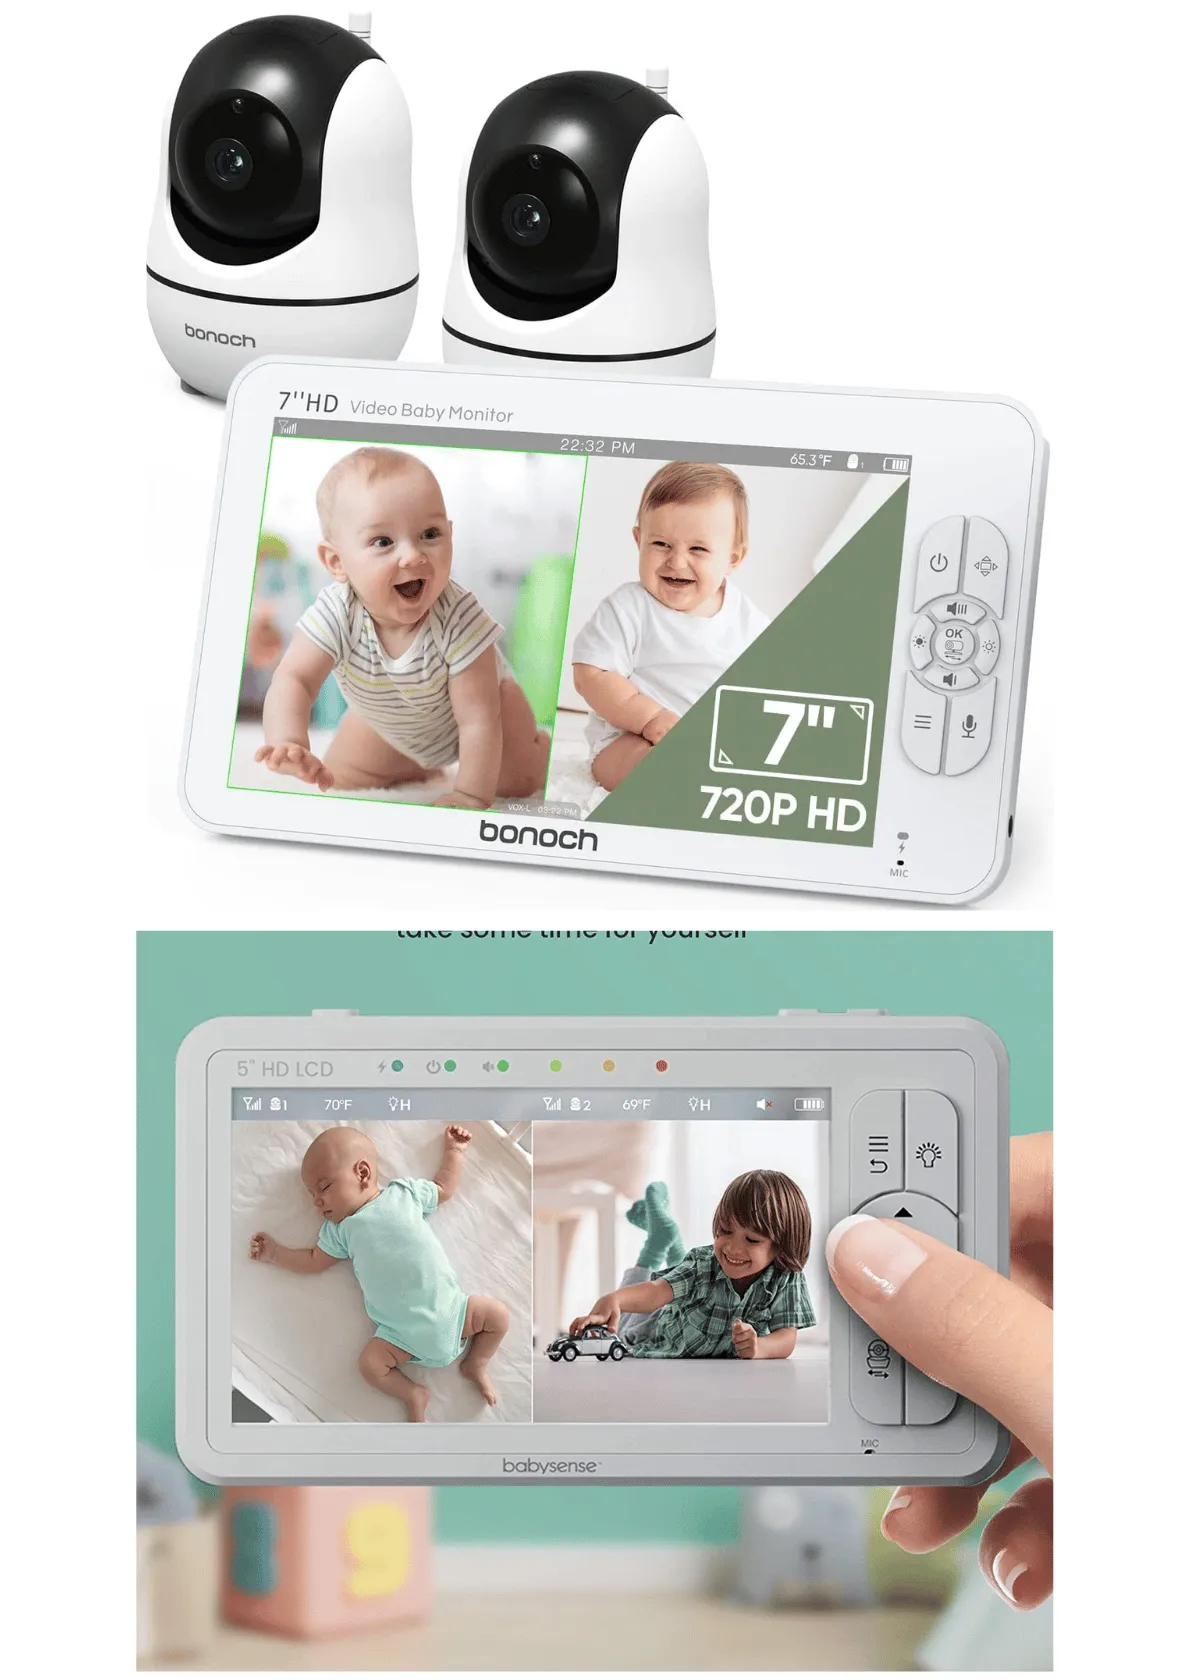 "7 Best Two Camera Baby Monitors | Compare Features and Prices"